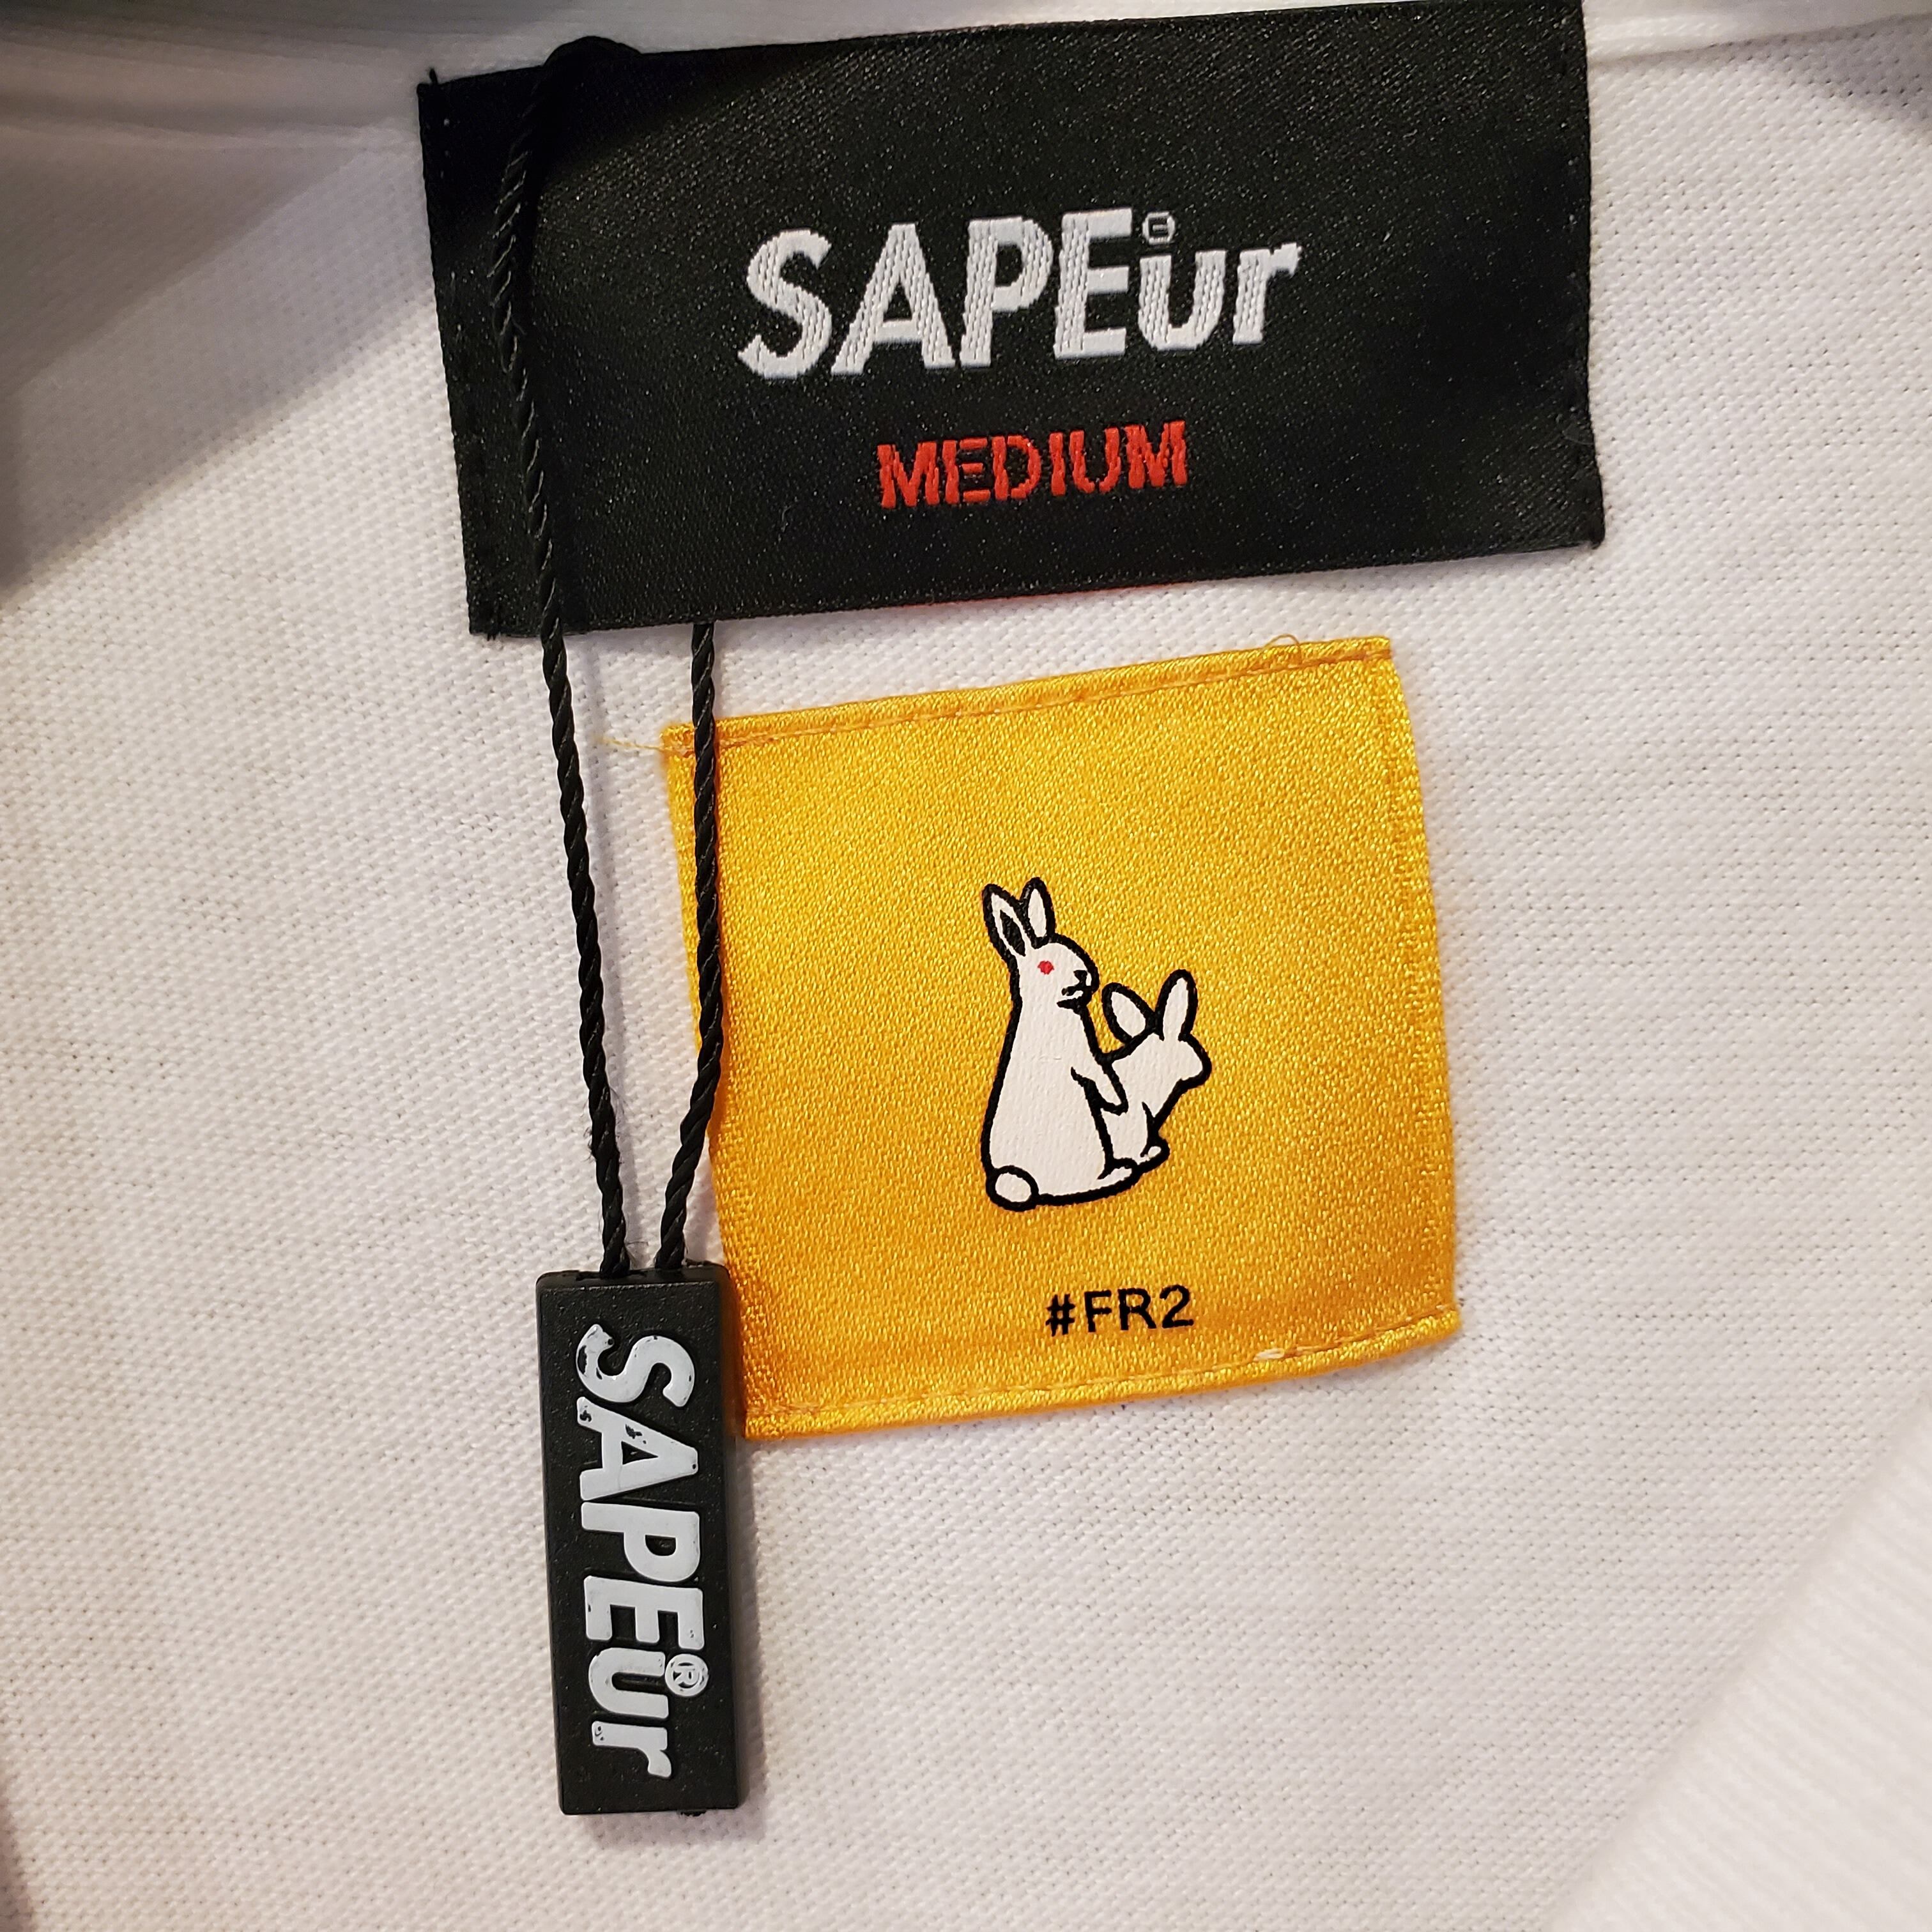 SAPEur collaboration with ＃FR2 BIG-S L/S tee